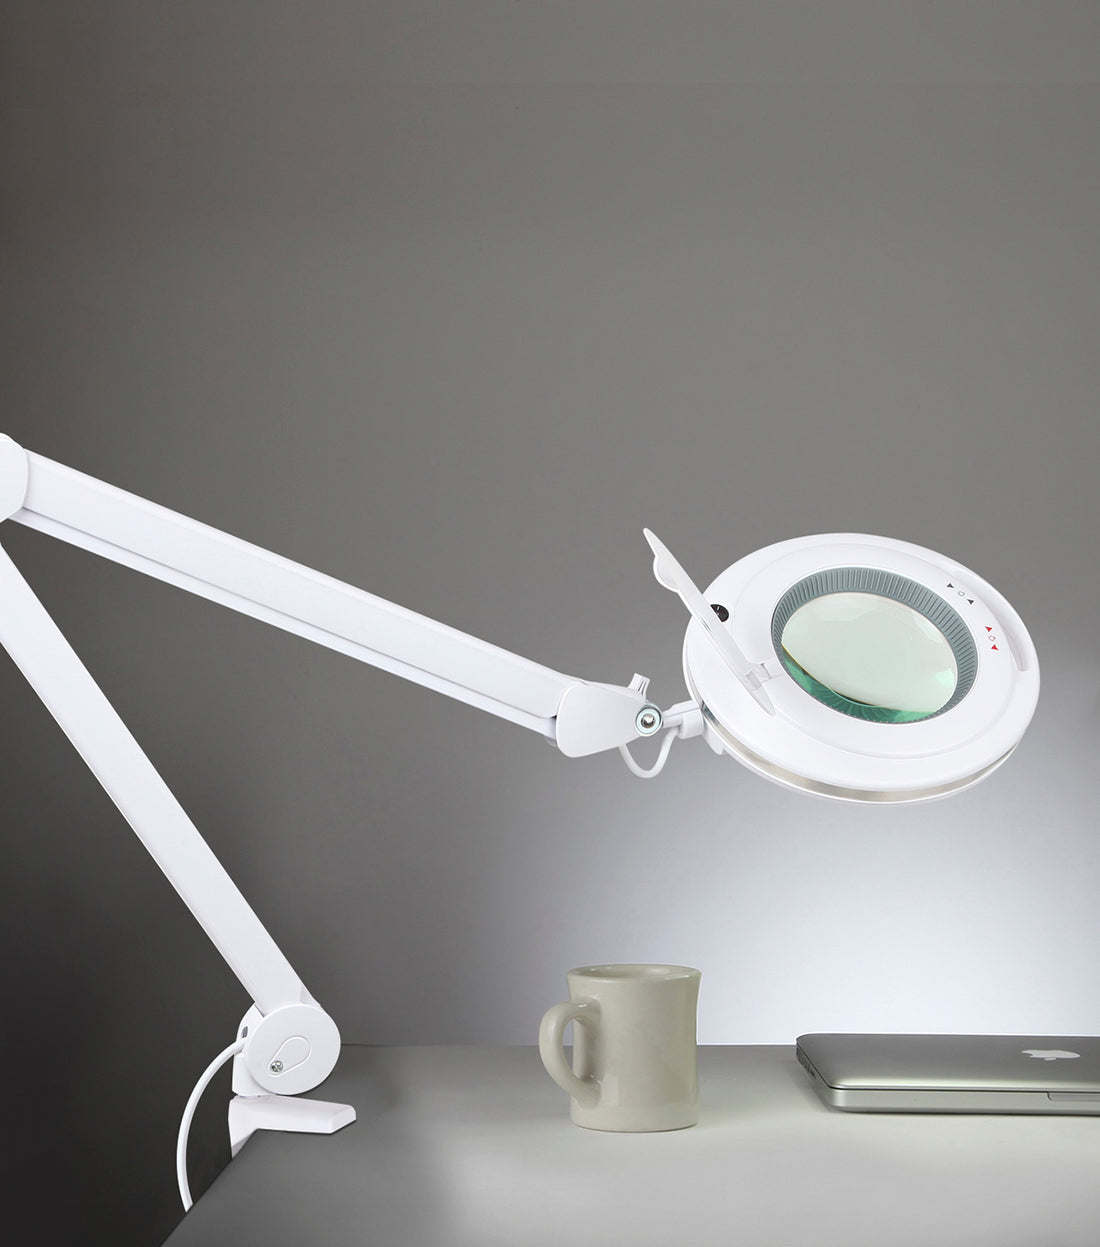 Brightech LightView Pro 6 Wheel Rolling Base Magnifying Floor Lamp -  Magnifier with Bright LED Light for Facials, Lash